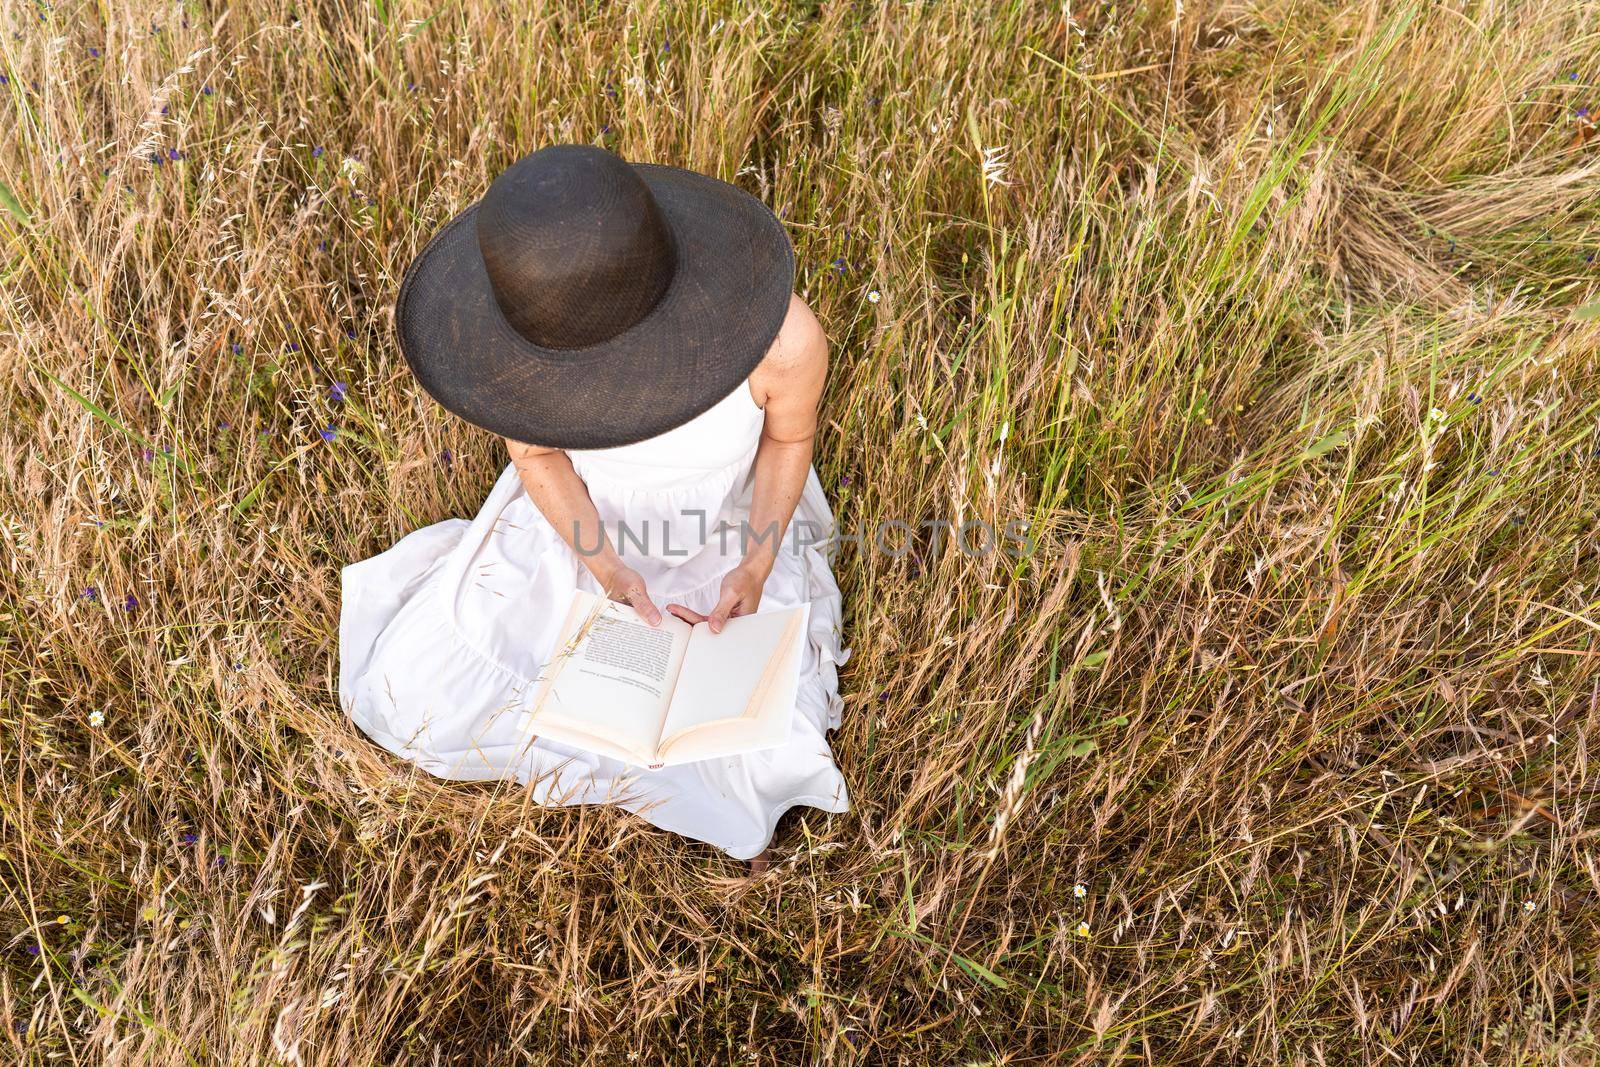 Romantic dreamy top view scene of unrecognizable woman sitting in a field of wheat and tall yellow grass wearing a dark wide-brimmed hat holding a book. Boho girl reading preferred romance story tale